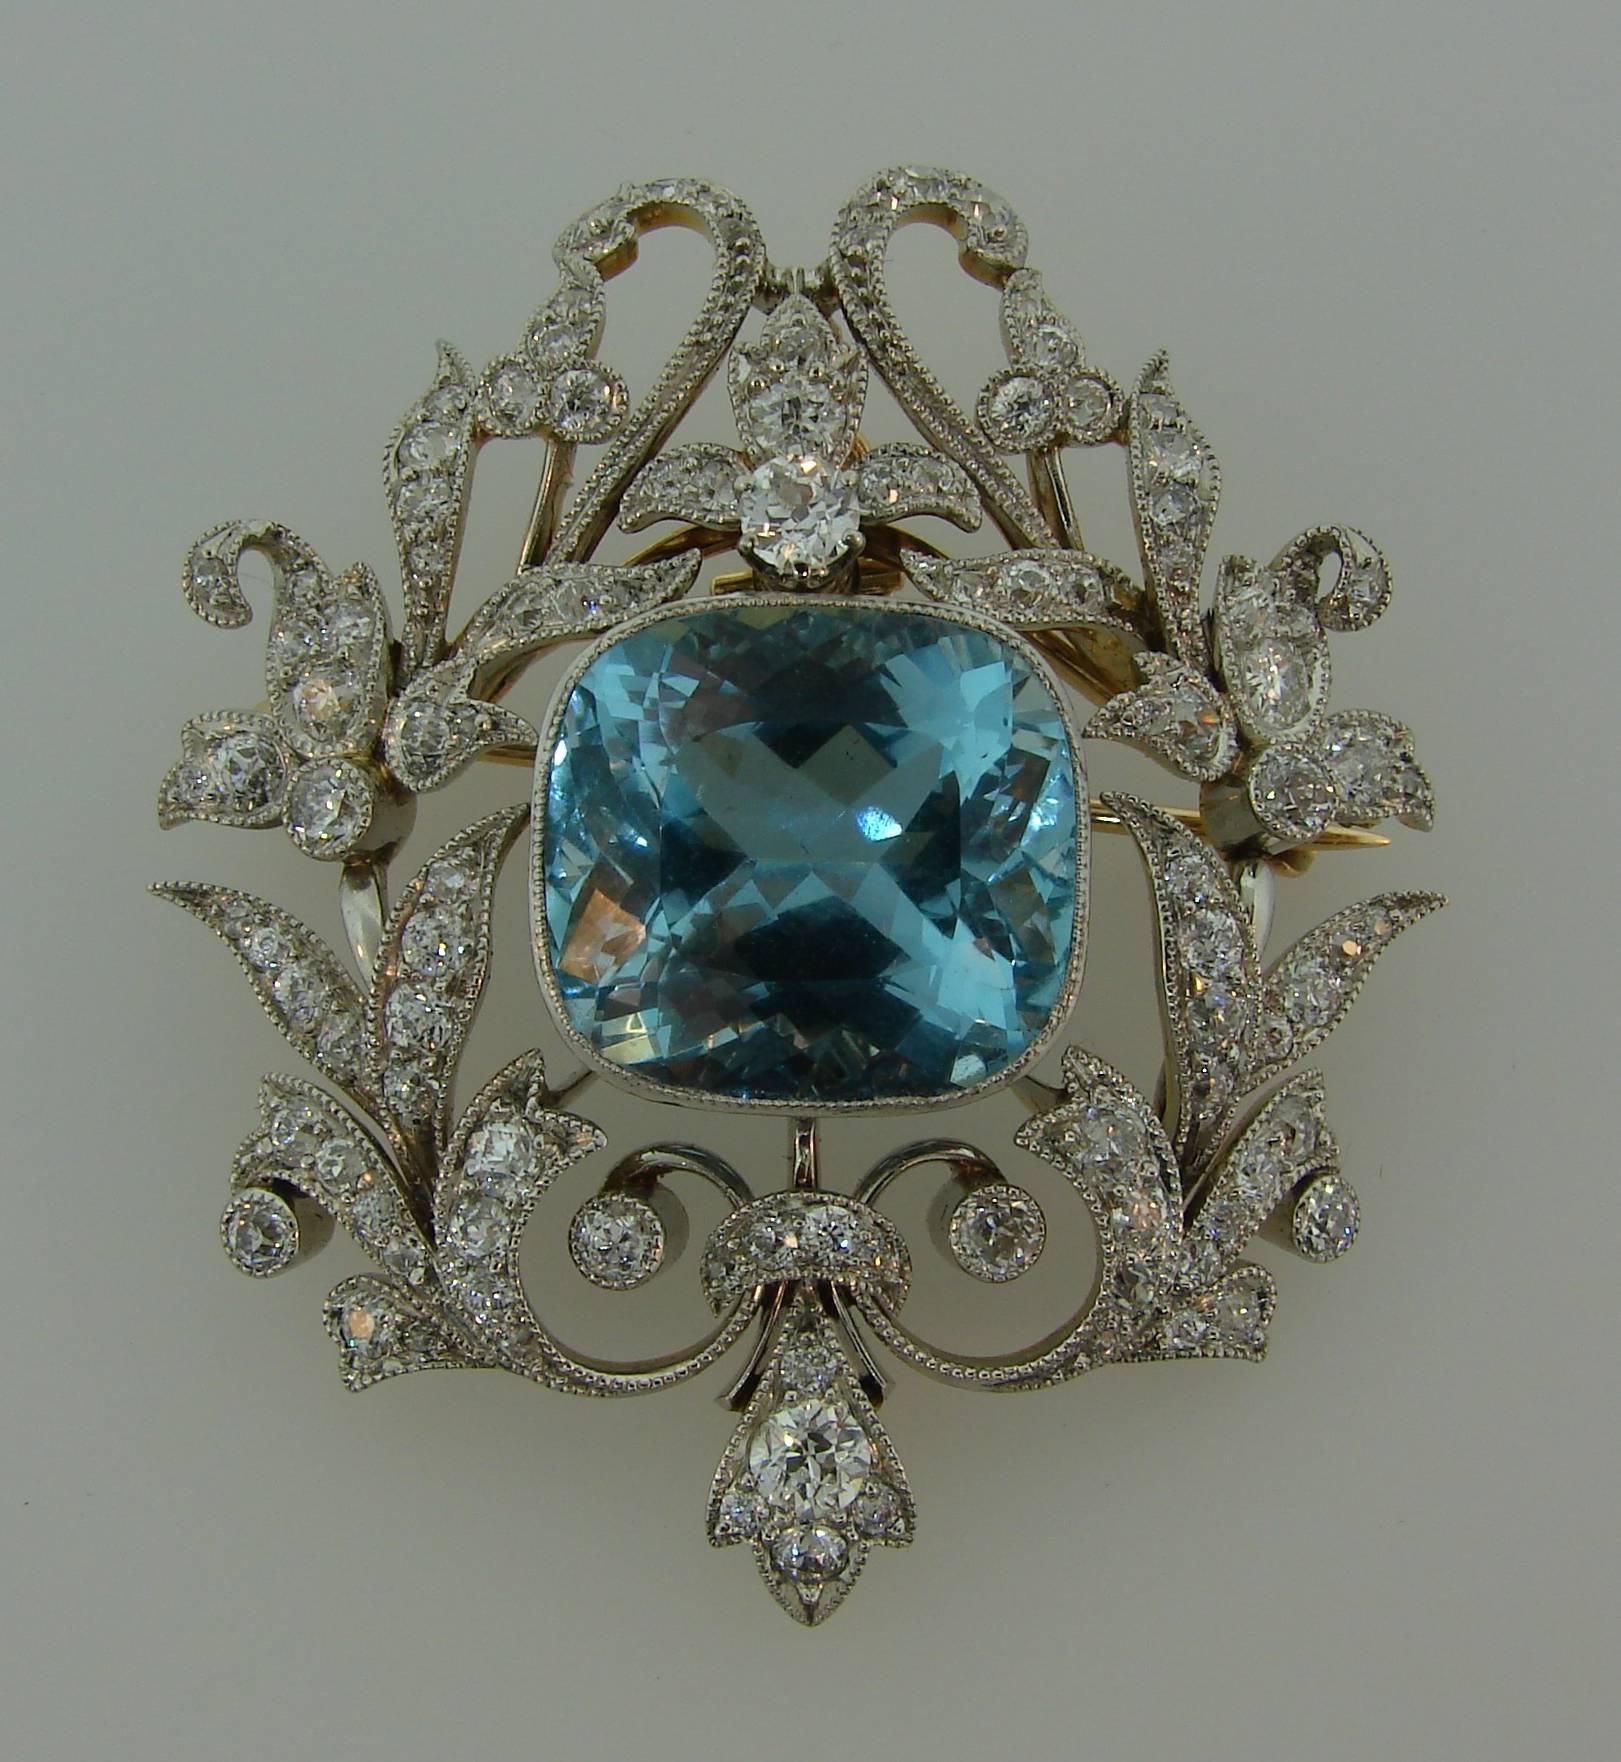 Amazing Edwardian (1901 – 1915) aquamarine and diamond pendant/brooch created by Black, Starr and Frost in the 1910s. Edwardian Jewelry is quintessentially feminine, lacy and delicate which makes the brooch a great addition to your jewelry